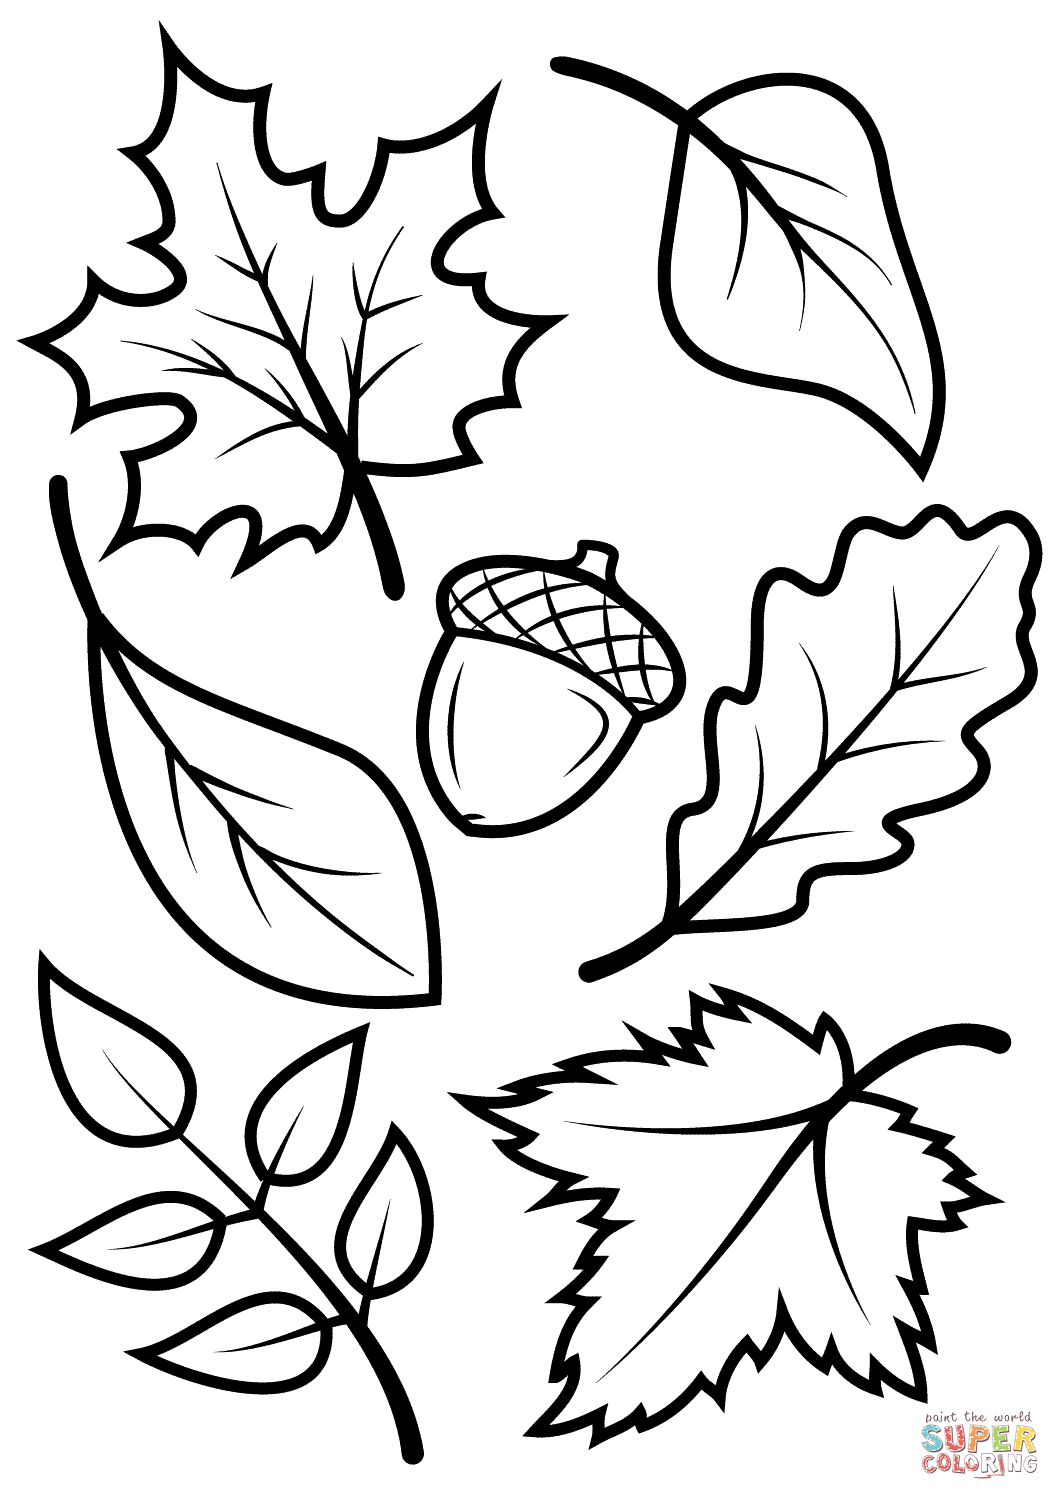 Fall Leaves And Acorn Coloring Page | Free Printable Coloring Pages - Free Printable Fall Leaves Coloring Pages